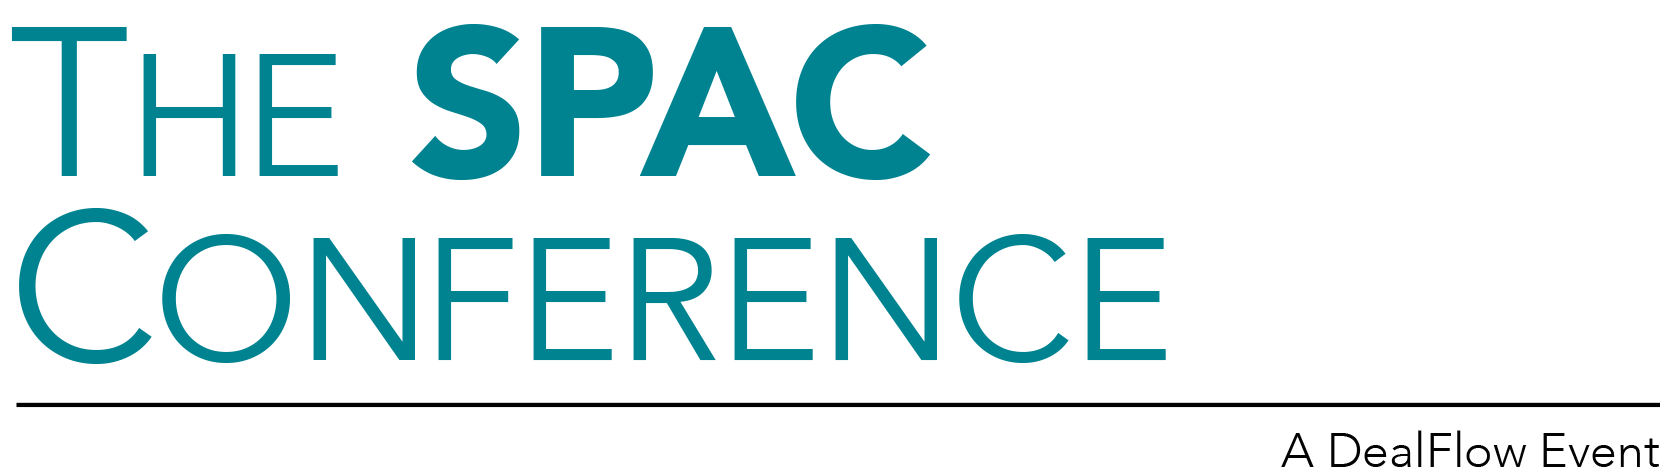 SPAC Logo - The SPAC Conference - DealFlow Events